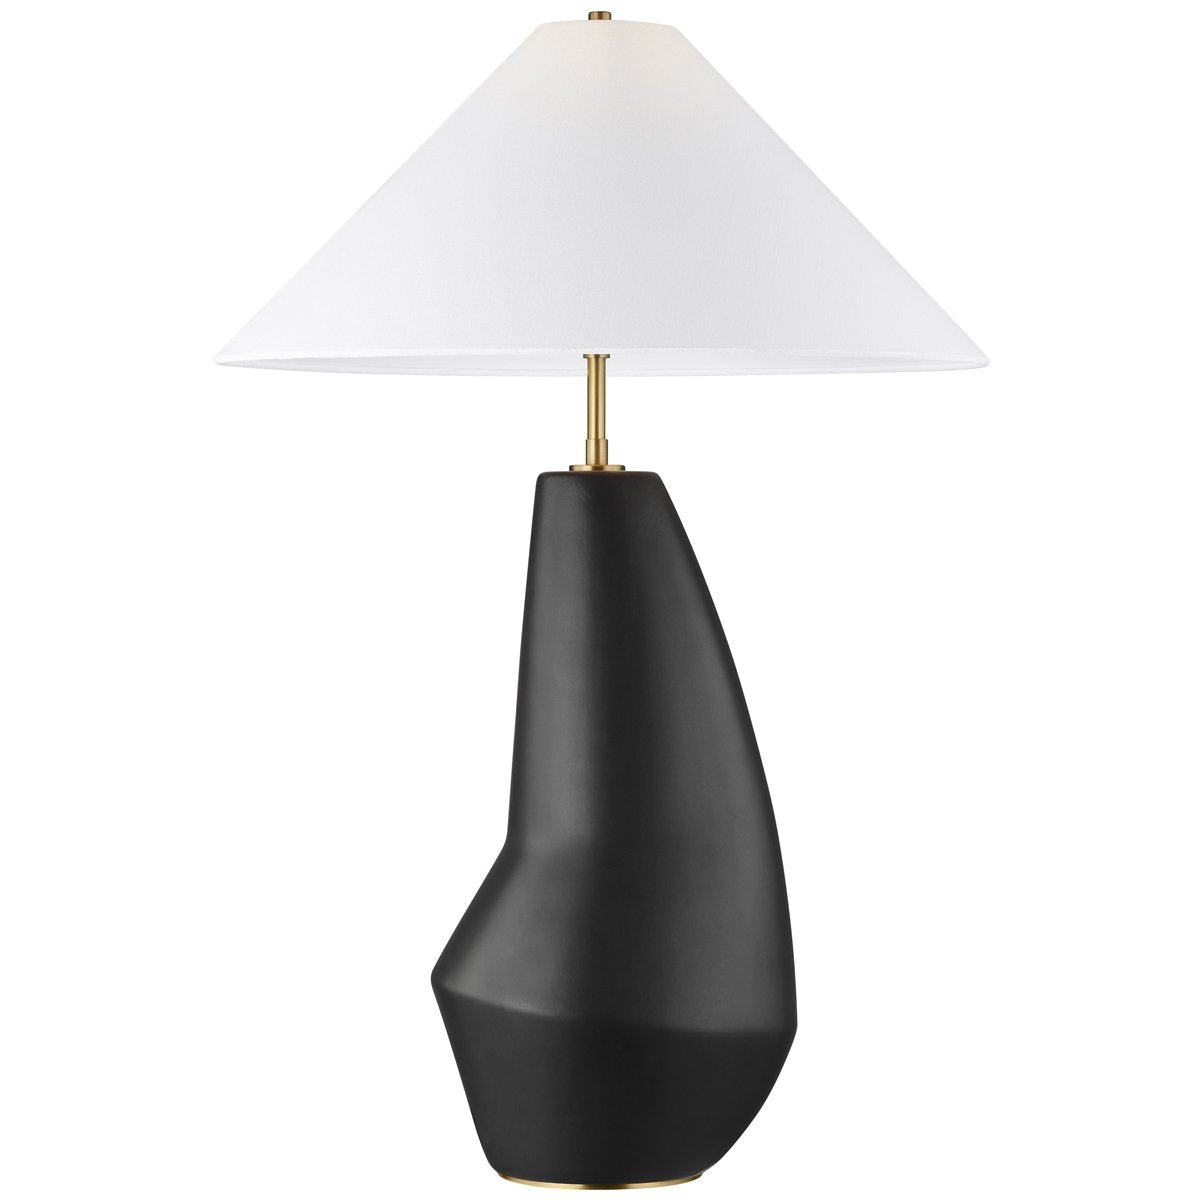 Feiss Contour Tall Table Lamp